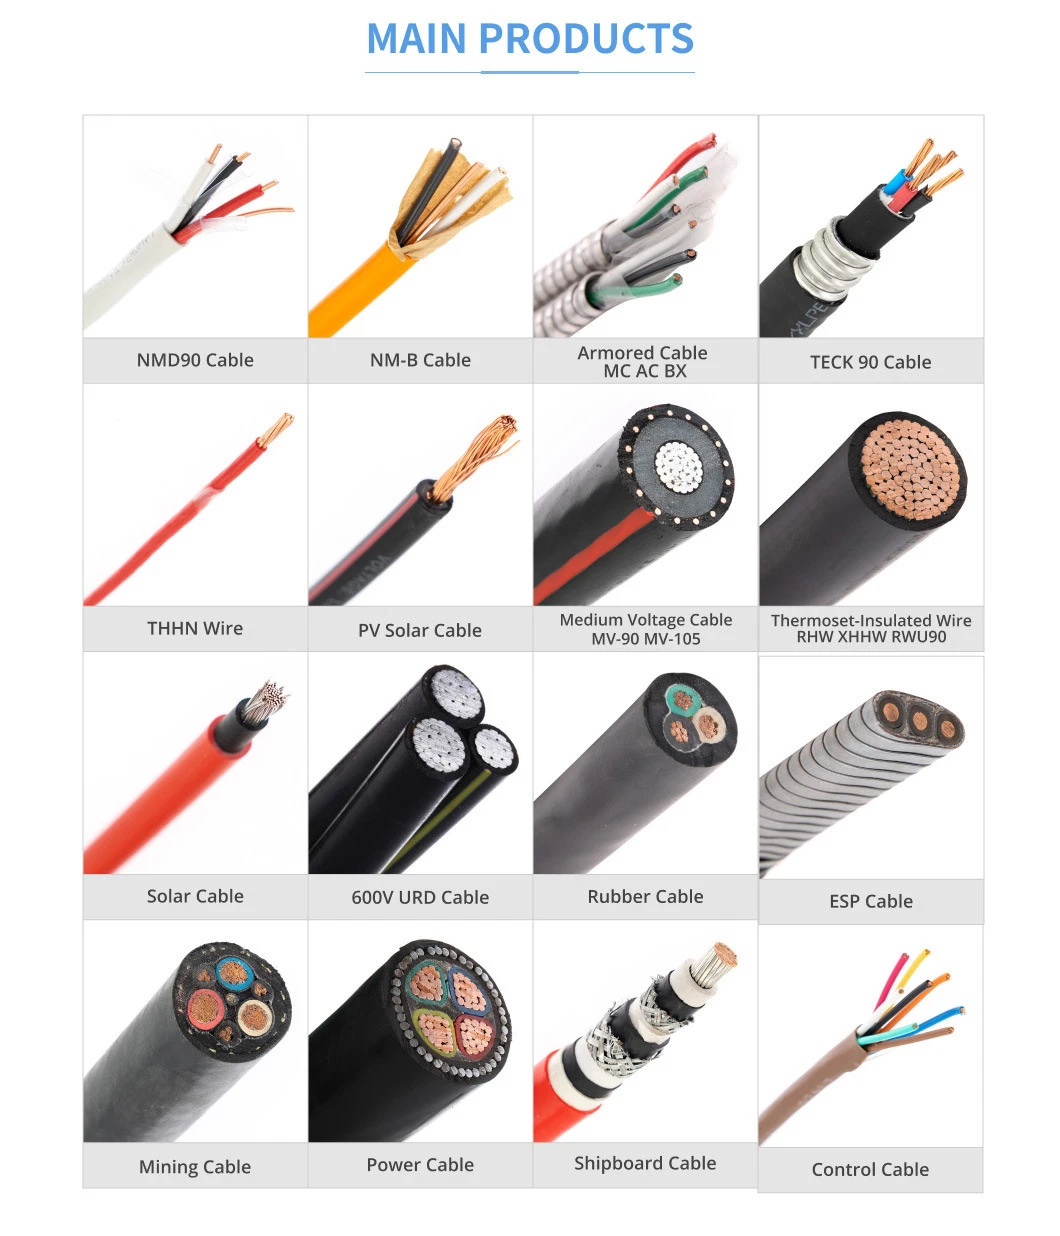 Mc Cable cUL Listed 1569 Metal Clad Cable 600volts Power Cable Copper Conductor Aluminum Armor/Thhn/Thwn-2 Electrical Wire